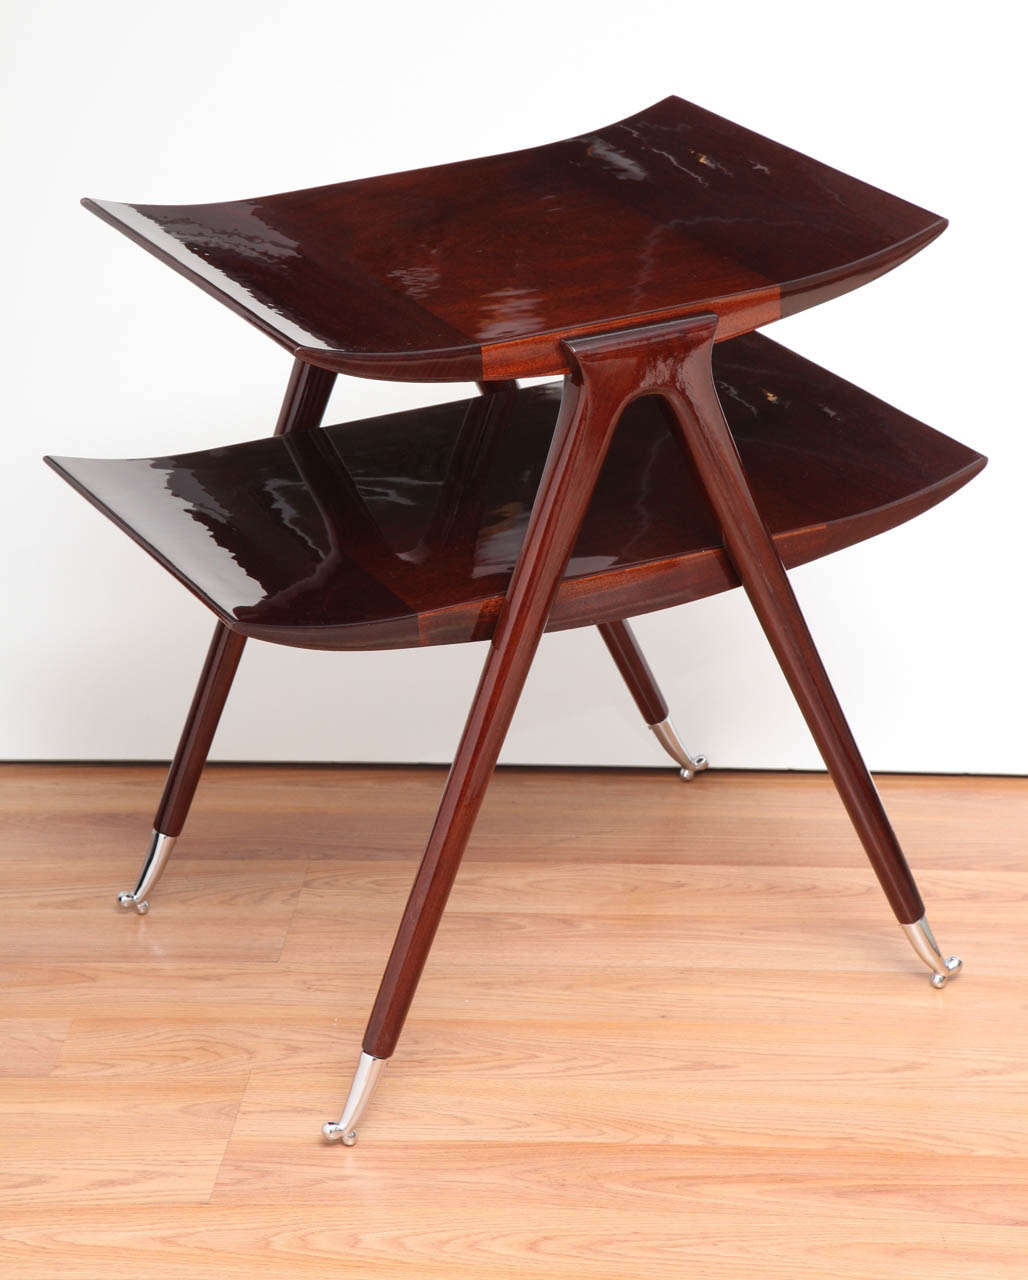 Side table in the style of Gio Ponti made in mahogany with polished chrome feet.